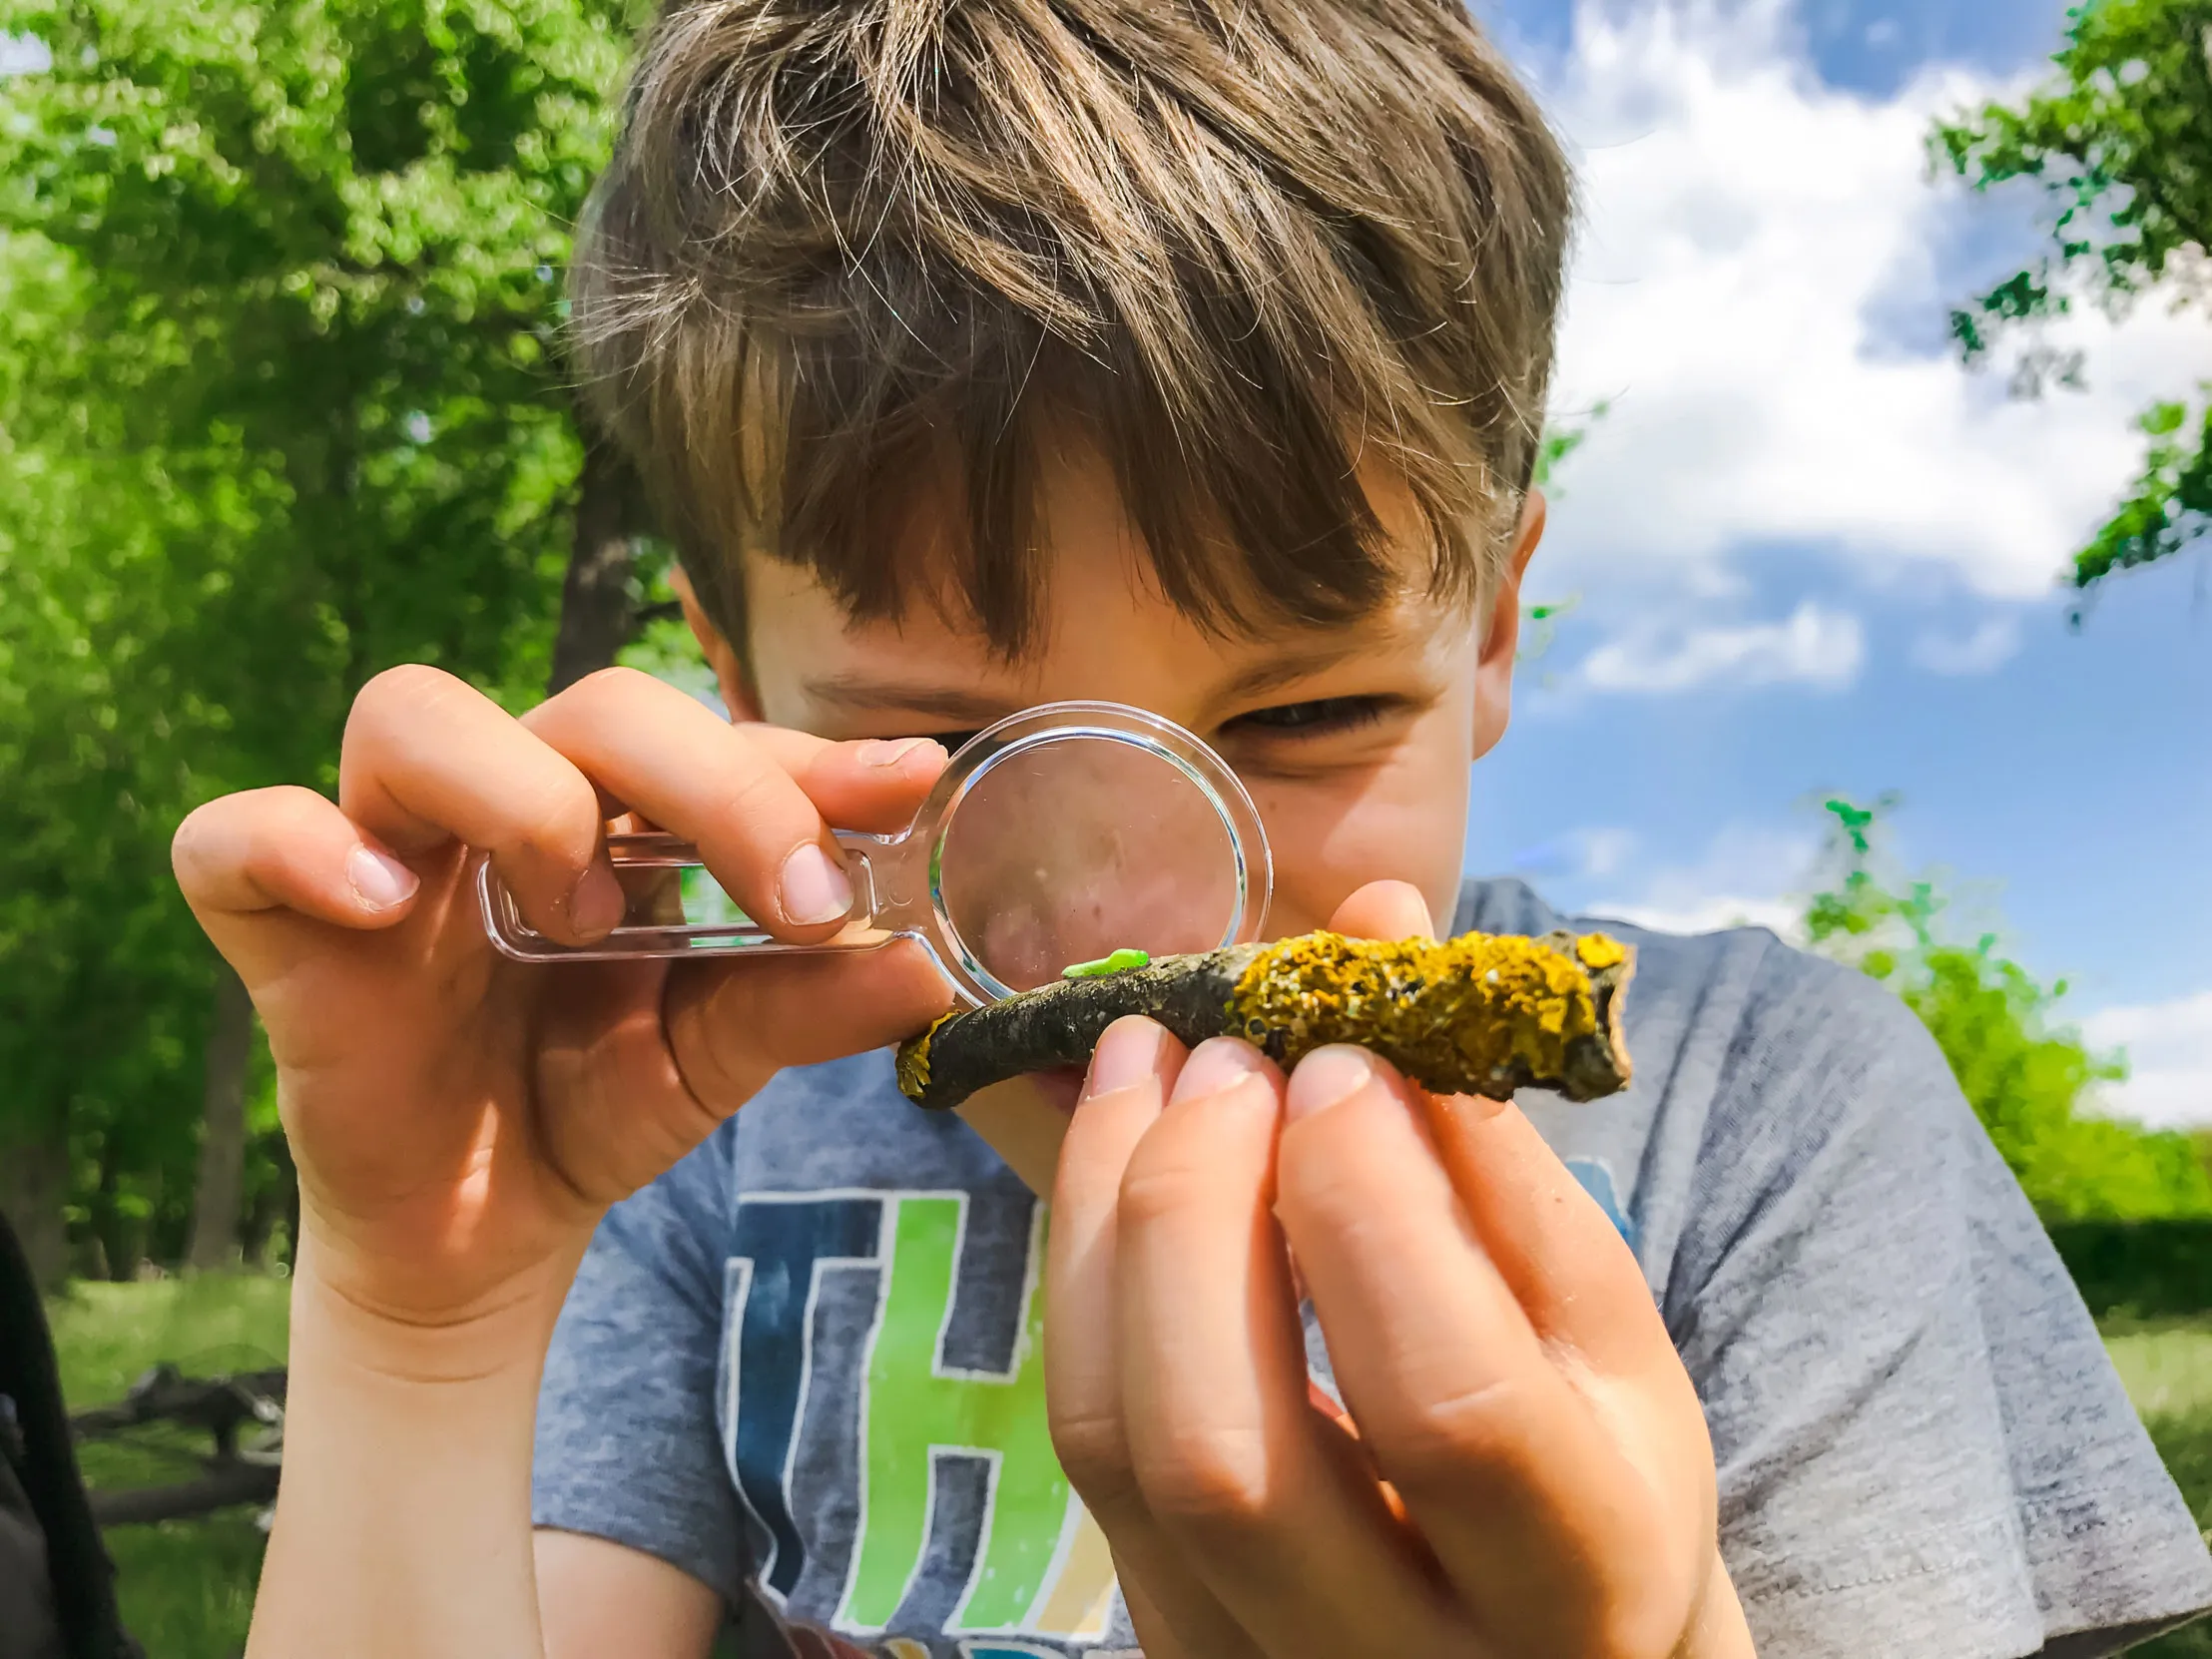 A child looking through a magnifying glass at a lichen covered twig with a small green caterpillar on it.